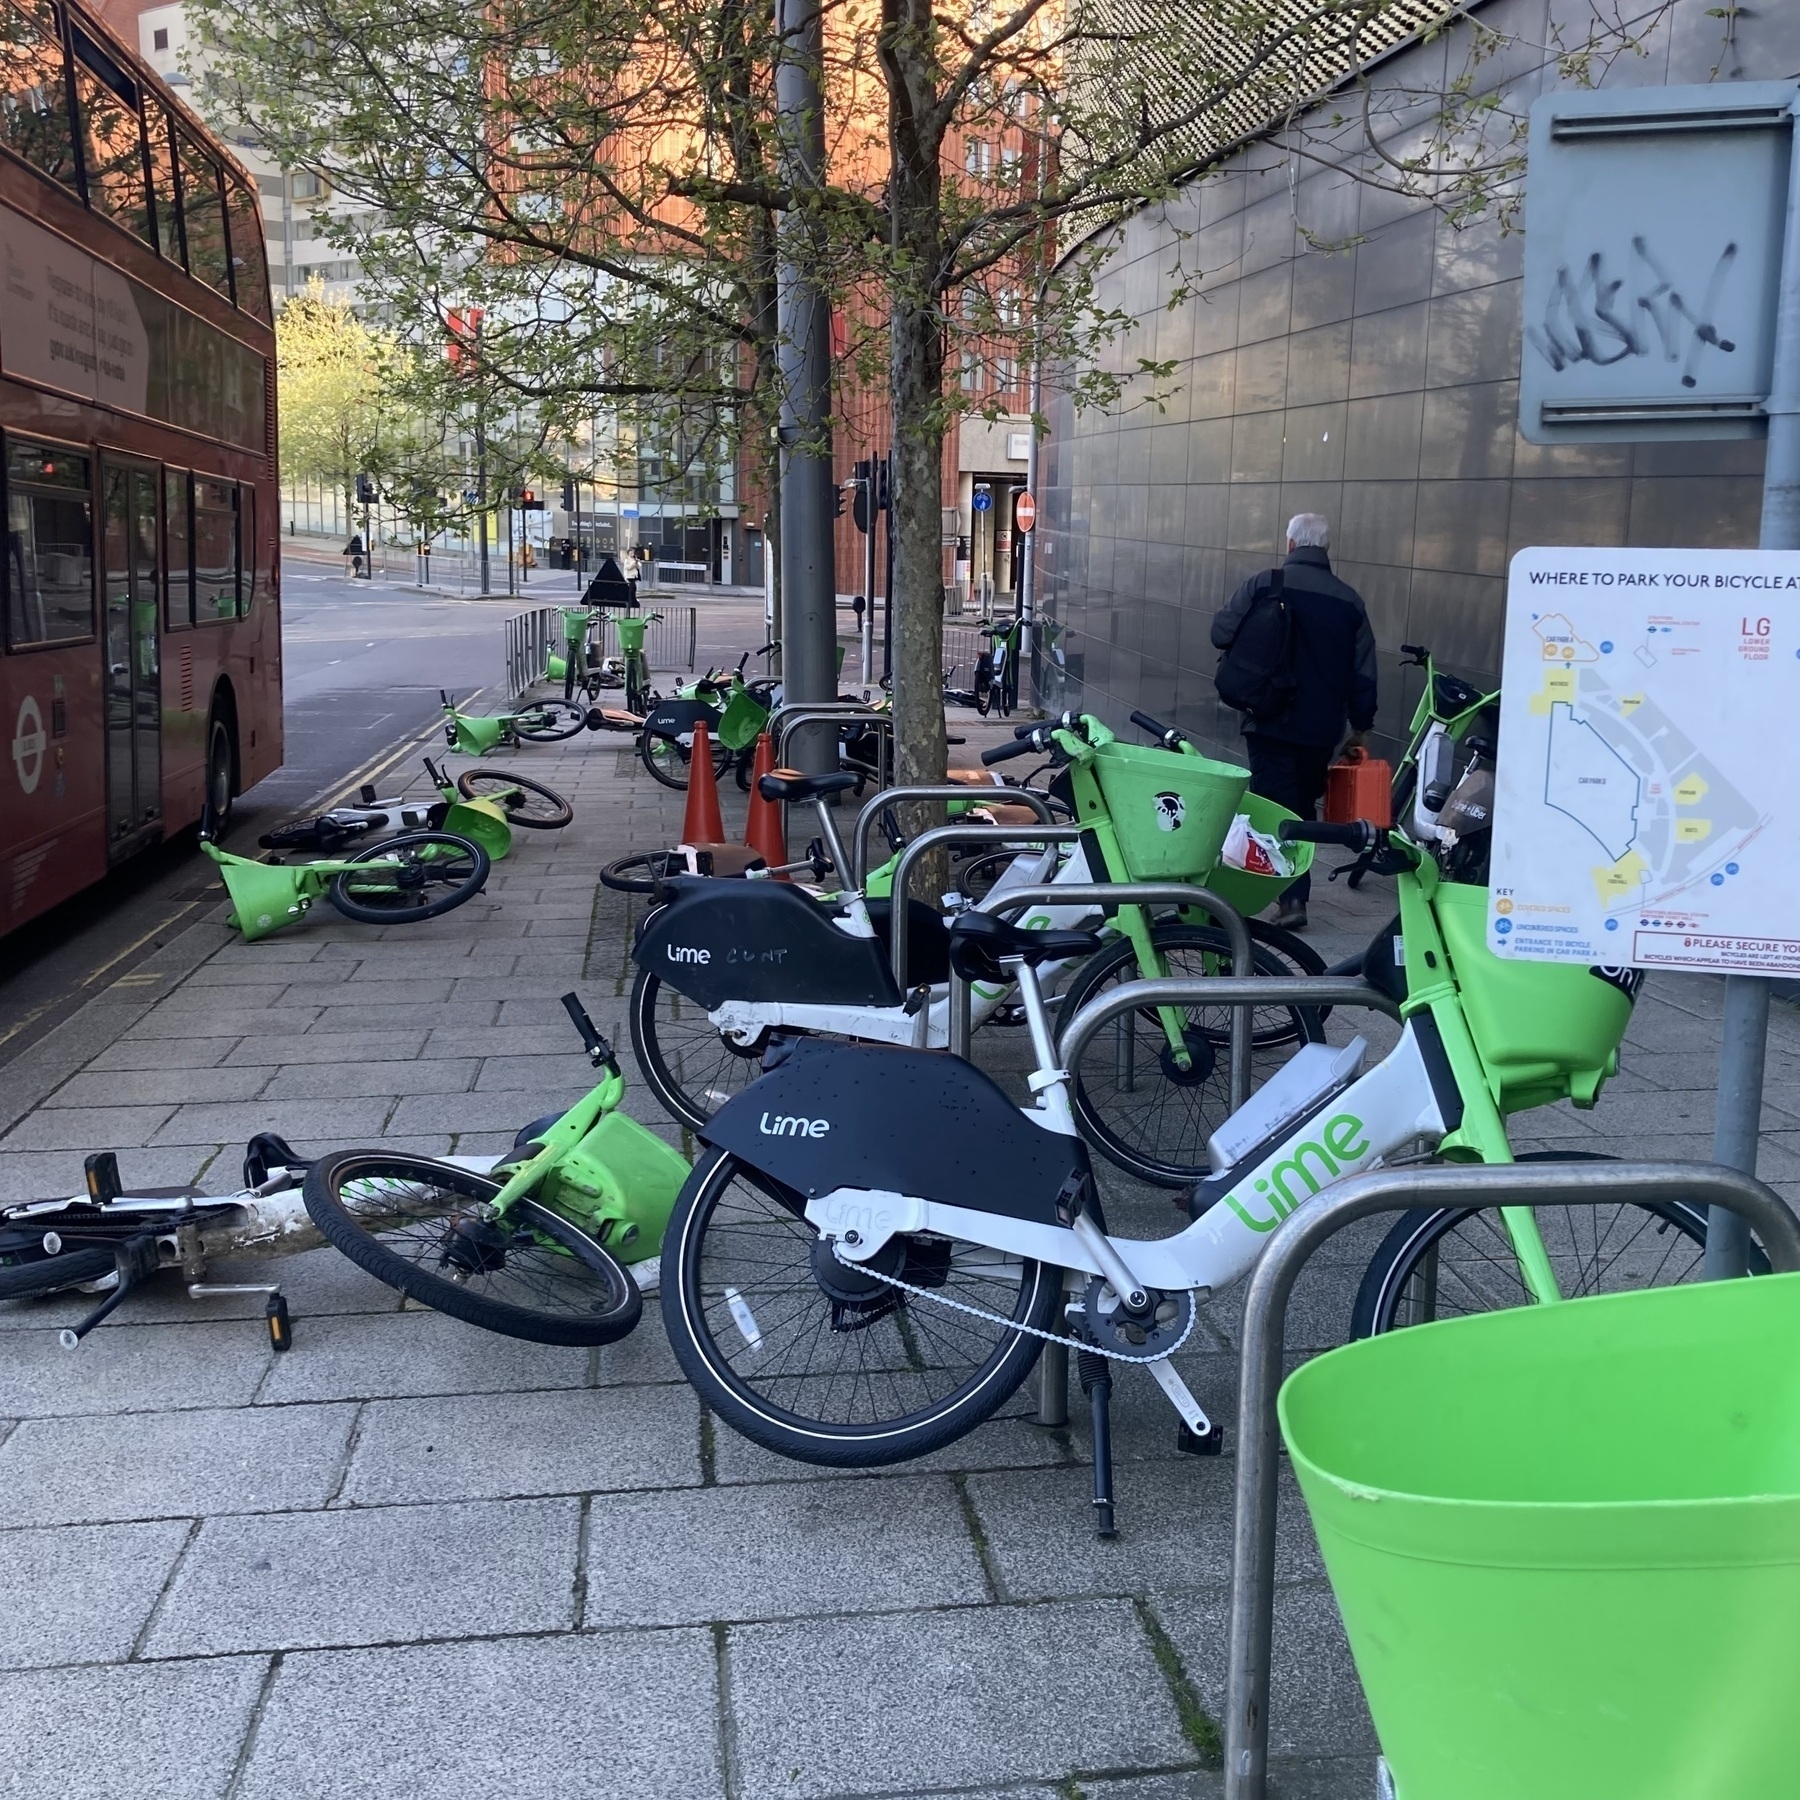 Bright green Lime e-bikes parked haphazardly or scattered on the pavement